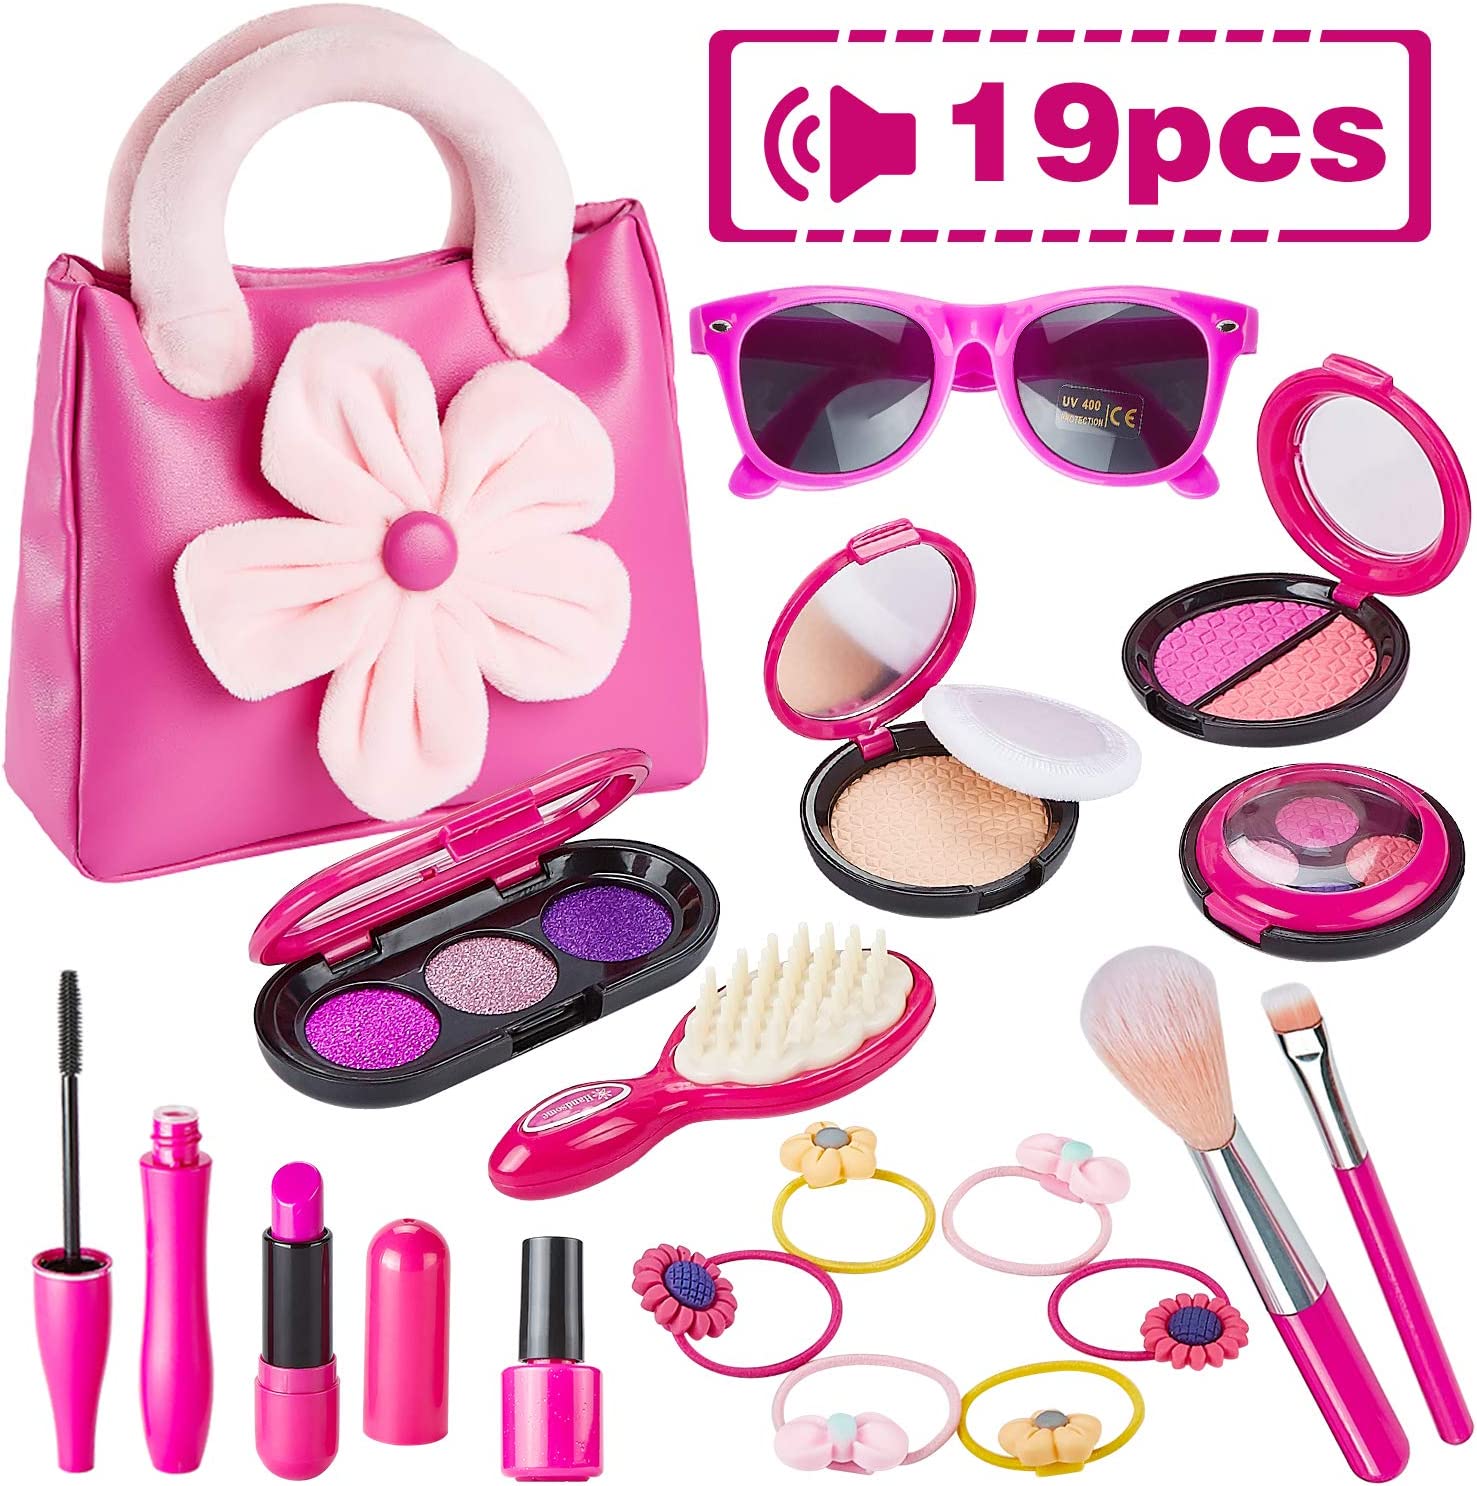 Play Makeup Set with Pink Floral Tote Bag for Little Girls Age 3+